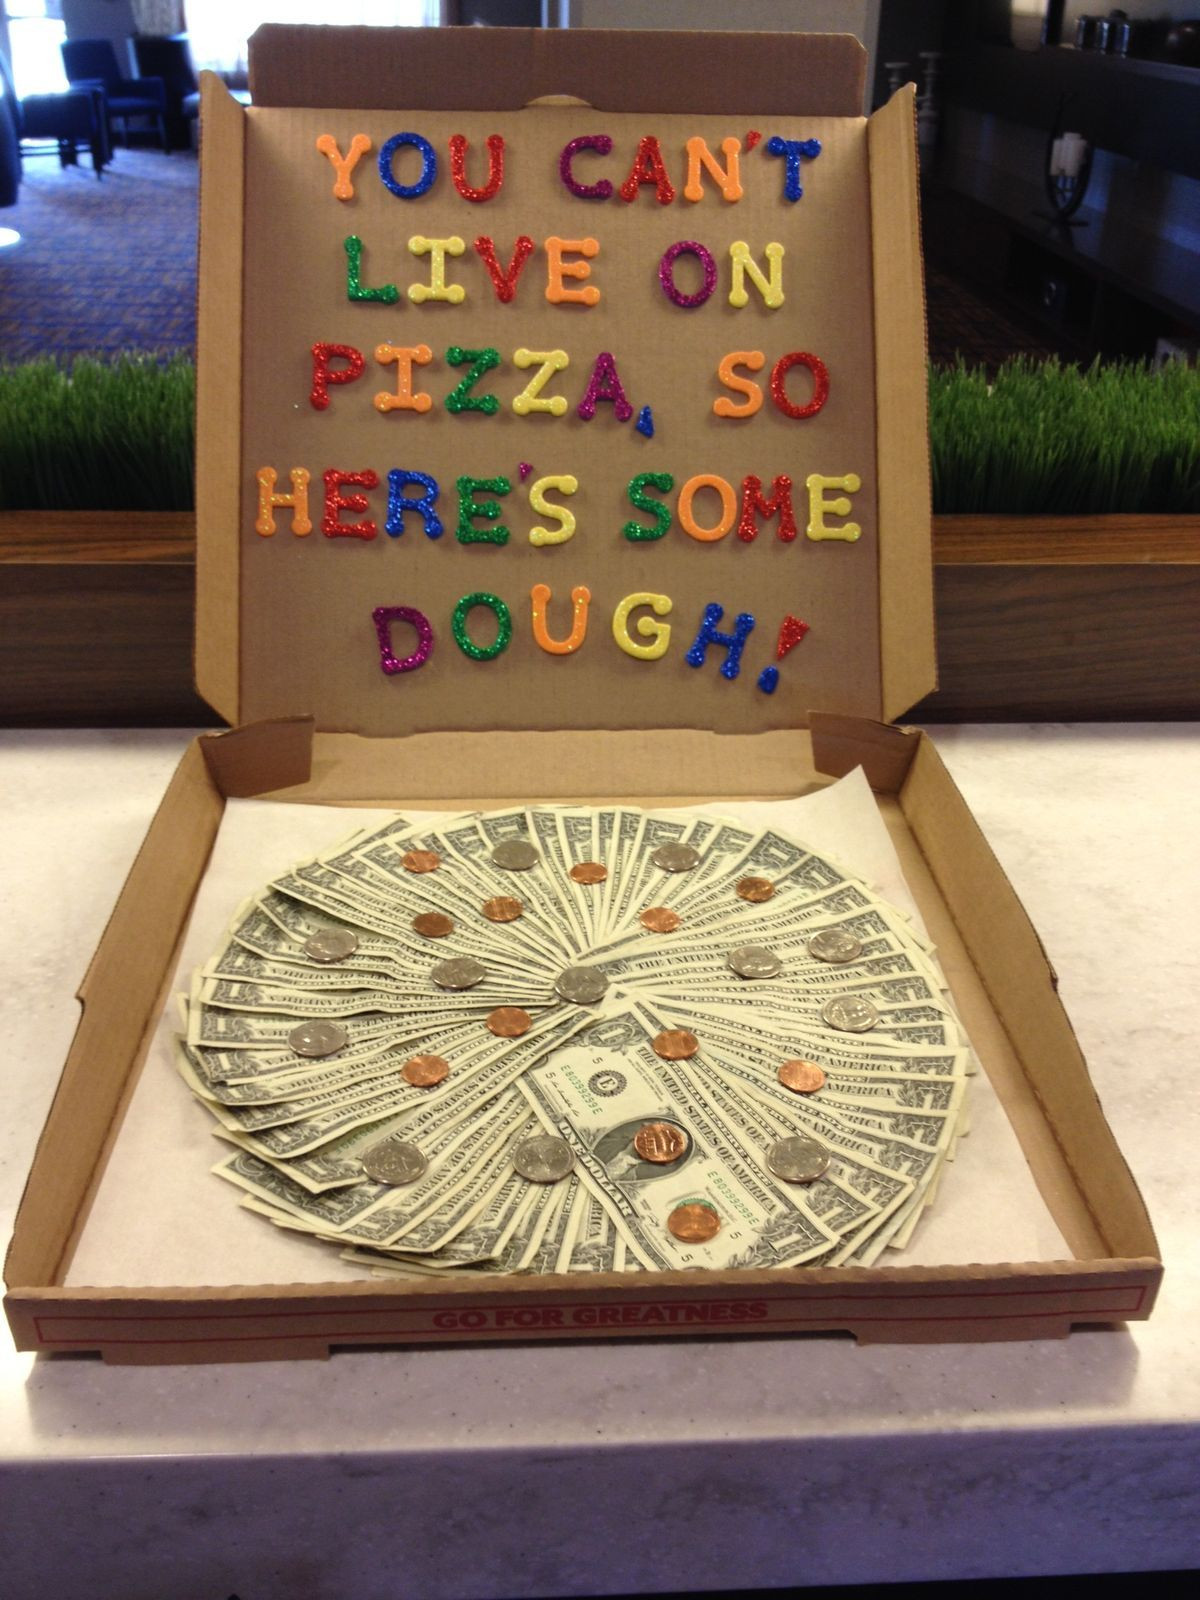 Girlfriend Graduation Gift Ideas
 You can t live on pizza so here s some dough fun way